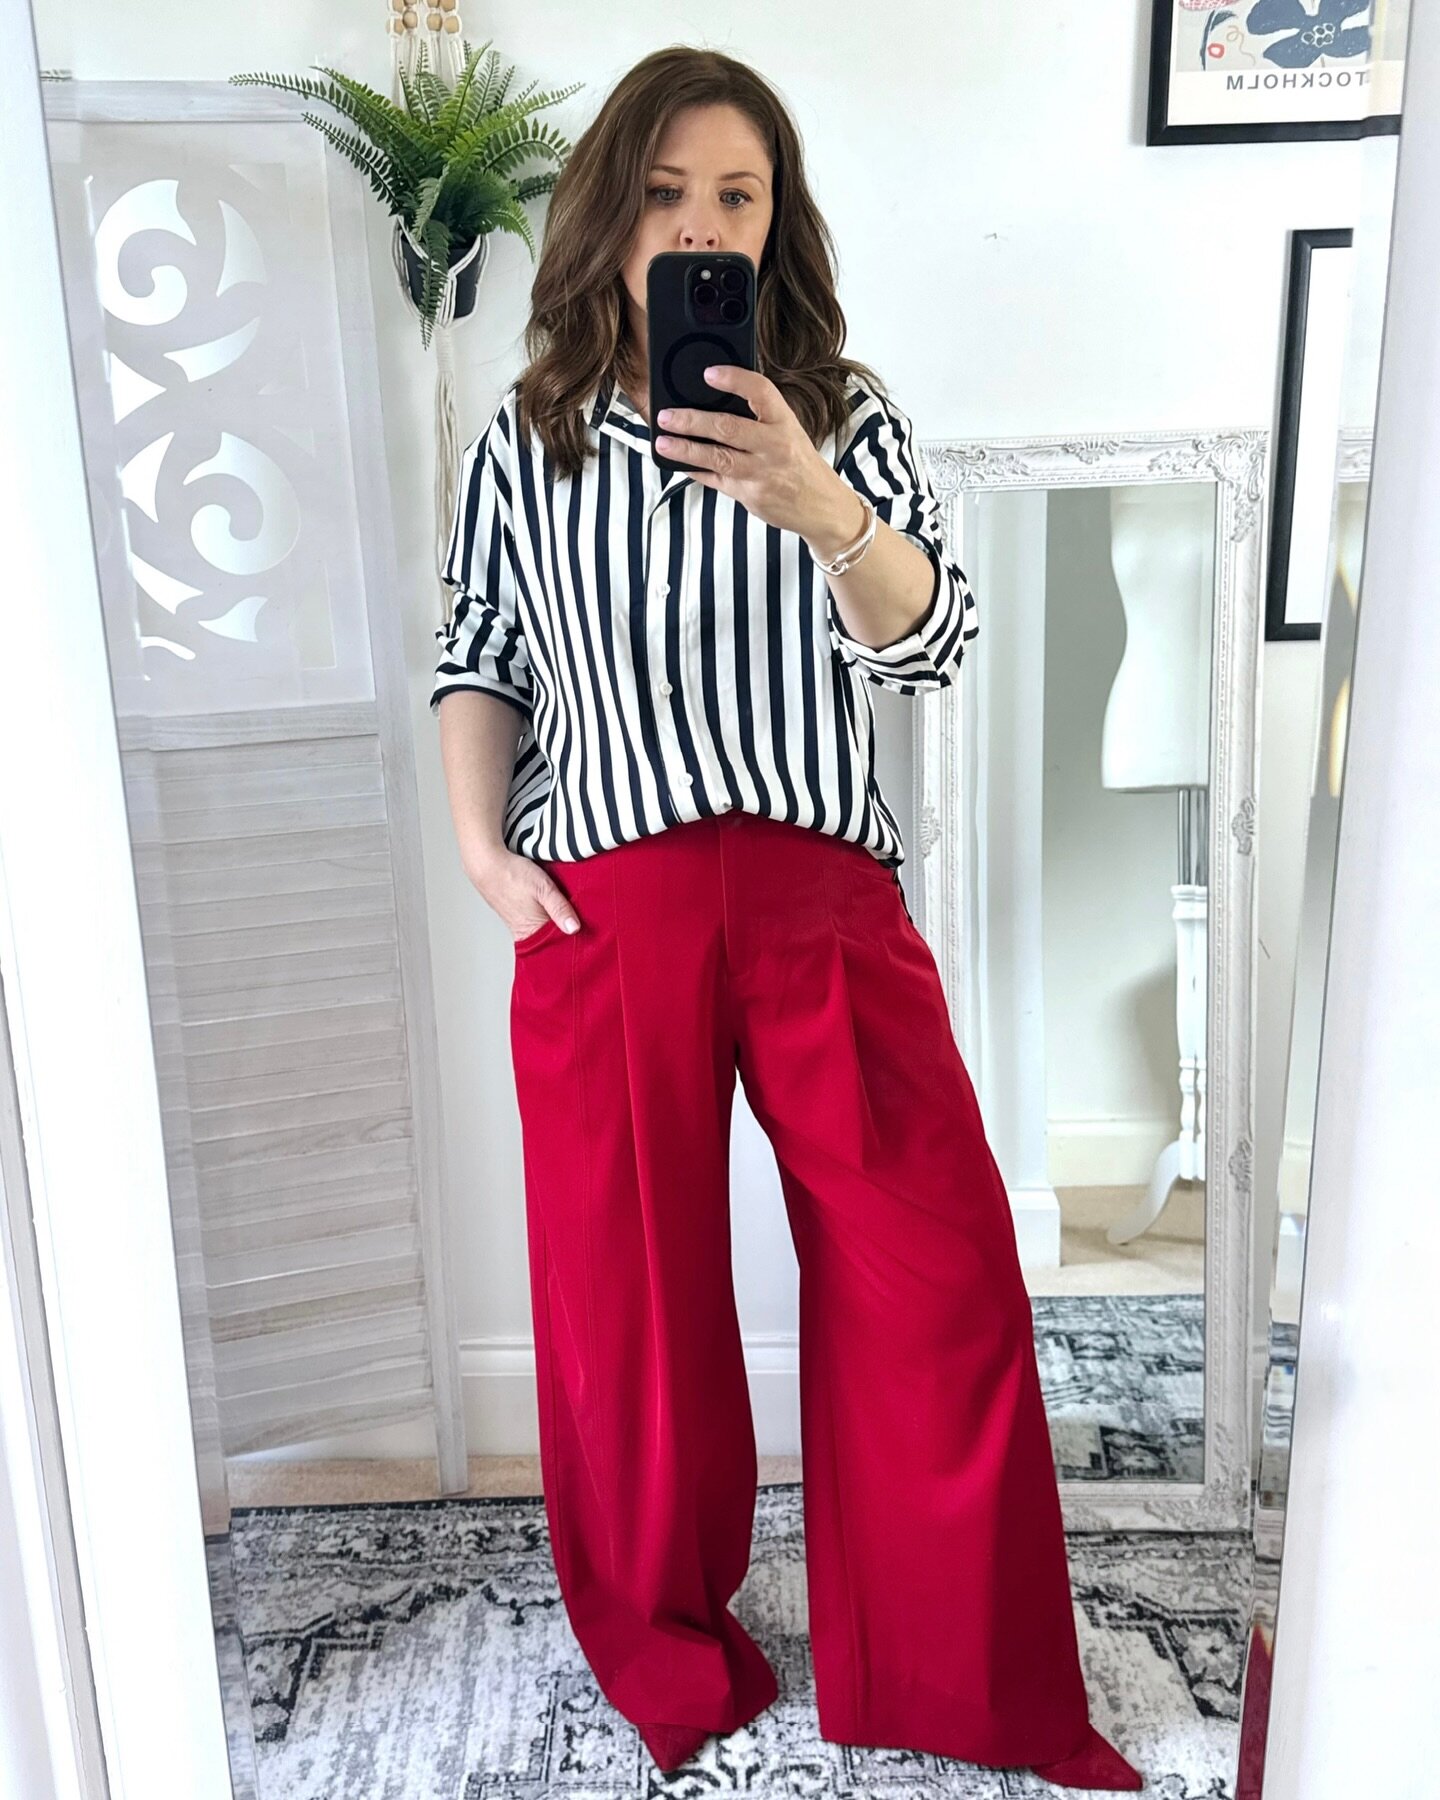 Match your shoe colour to trousers and pair with stripe shirt for an 'old money' look. 😀❤️
Shirt @hm 
Trousers @me_andem 
Boots old.
.
.
.
.
 .
.
.
#meandem #lisaoshaughnessy #alwaysstylish #redtrousers #oldmoneyaesthetic #personalstylistlondon #lon